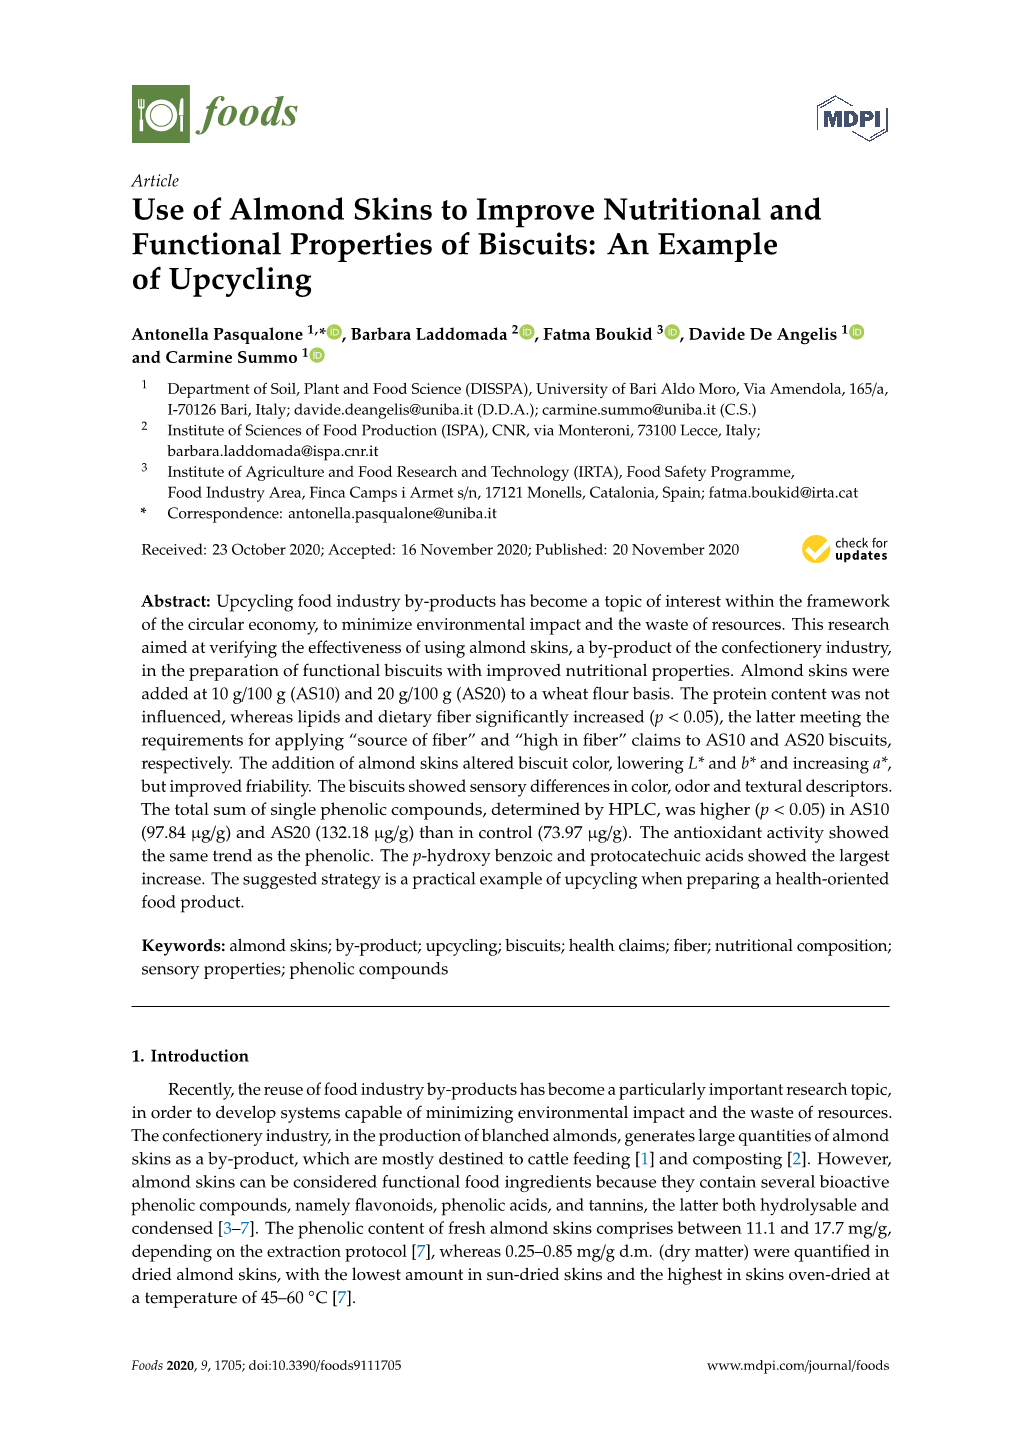 Use of Almond Skins to Improve Nutritional and Functional Properties of Biscuits: an Example of Upcycling